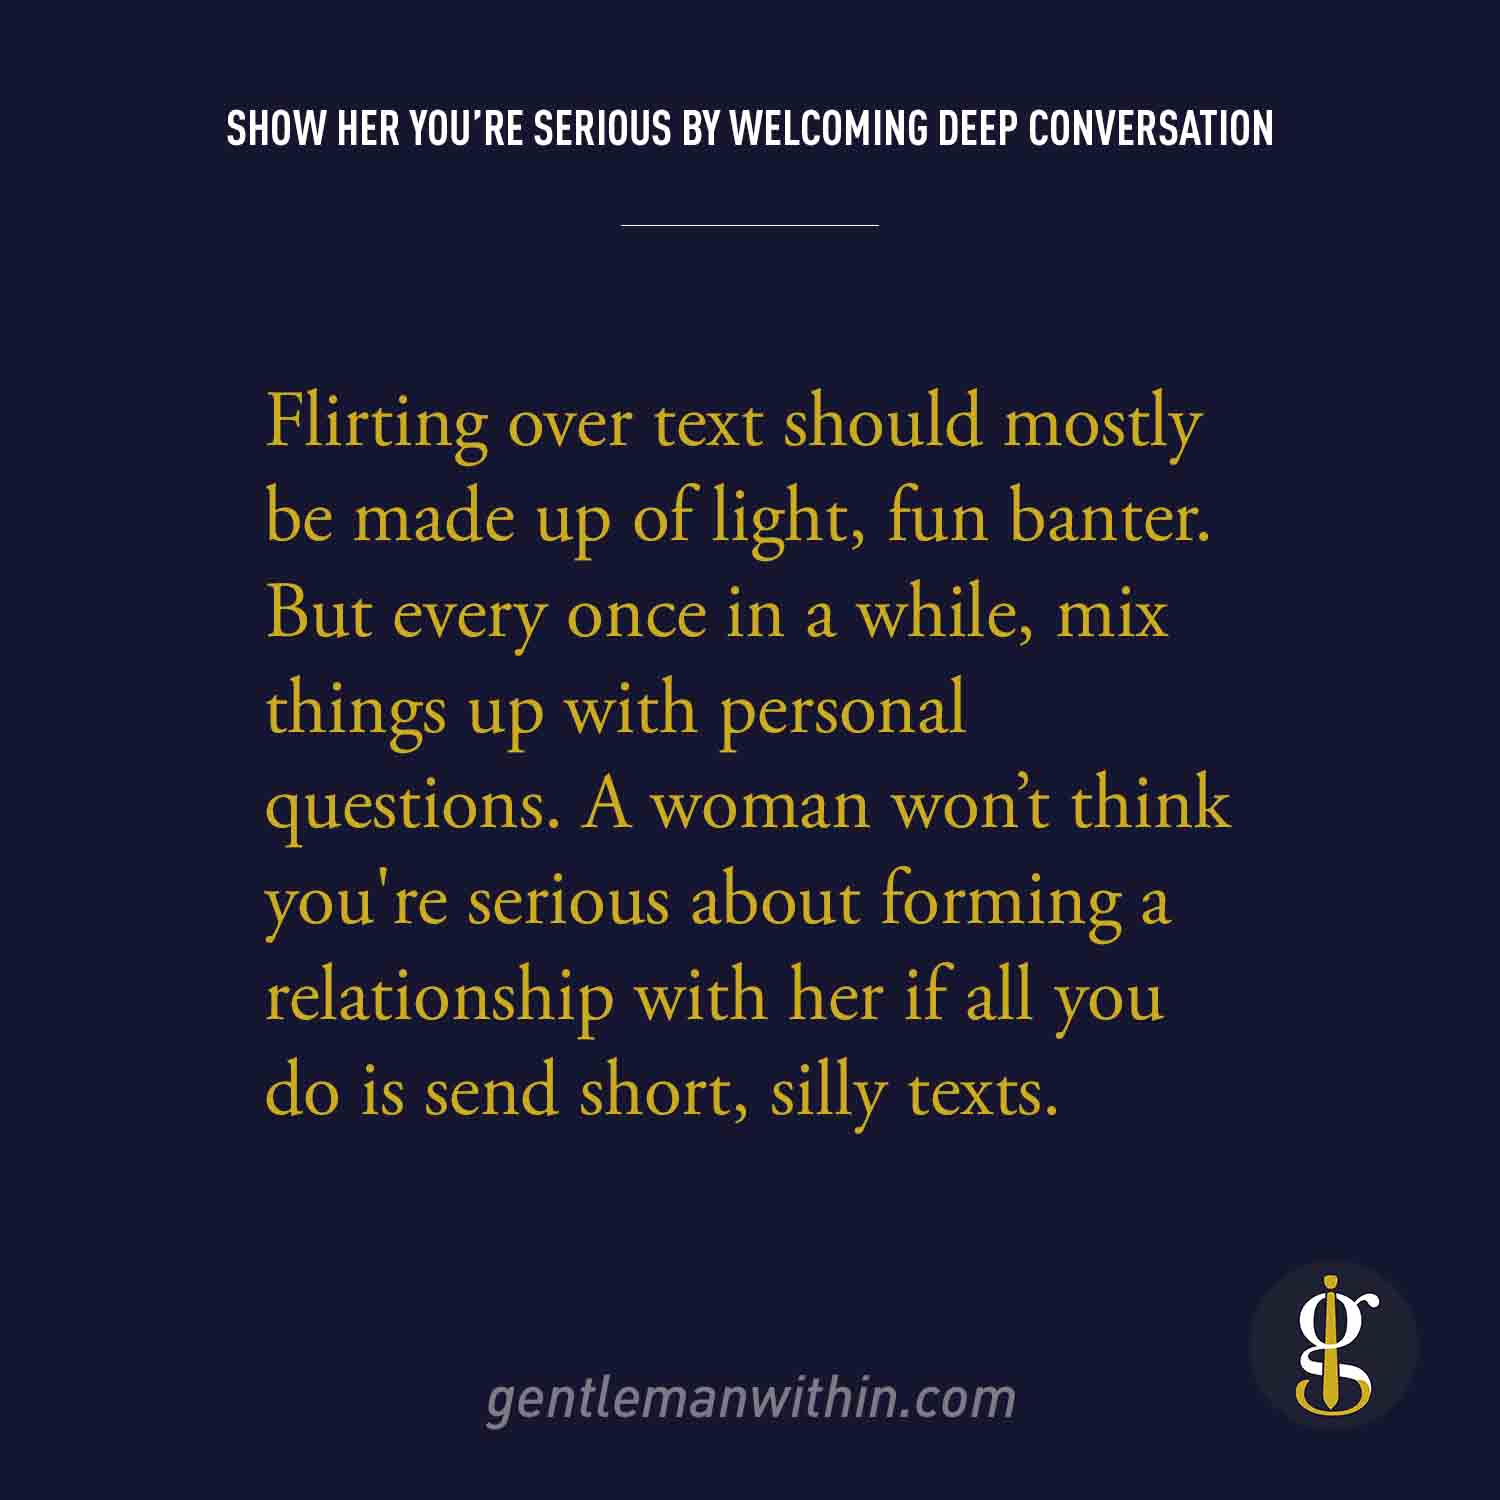 show her seriousness and welcome deep conversation